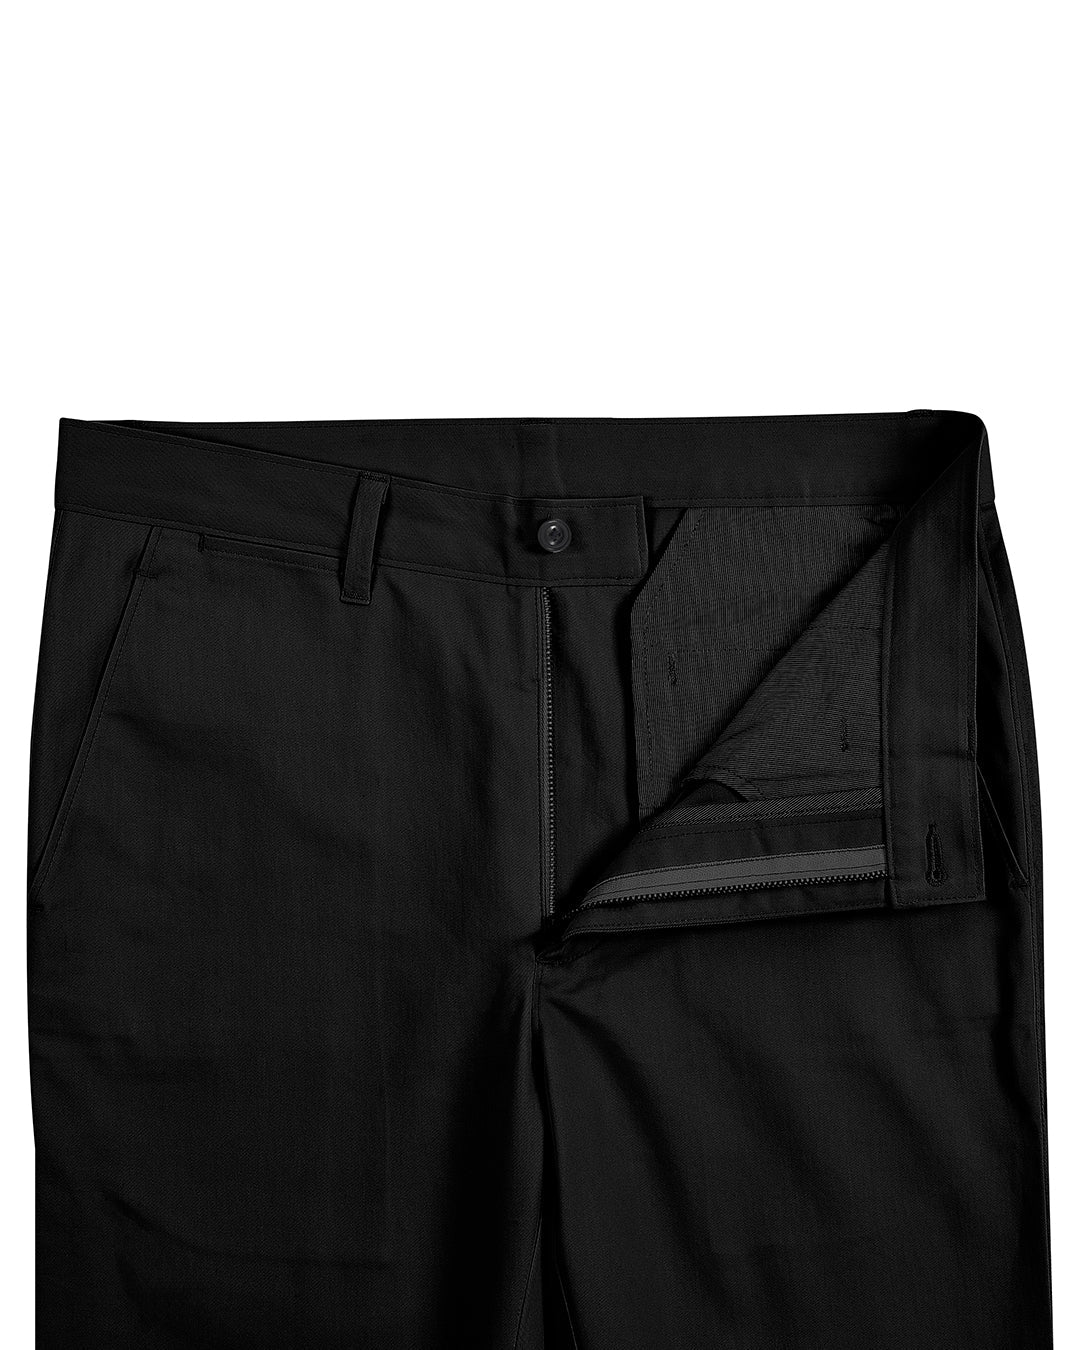 Open front view of custom Genoa Chino pants for men by Luxire in black